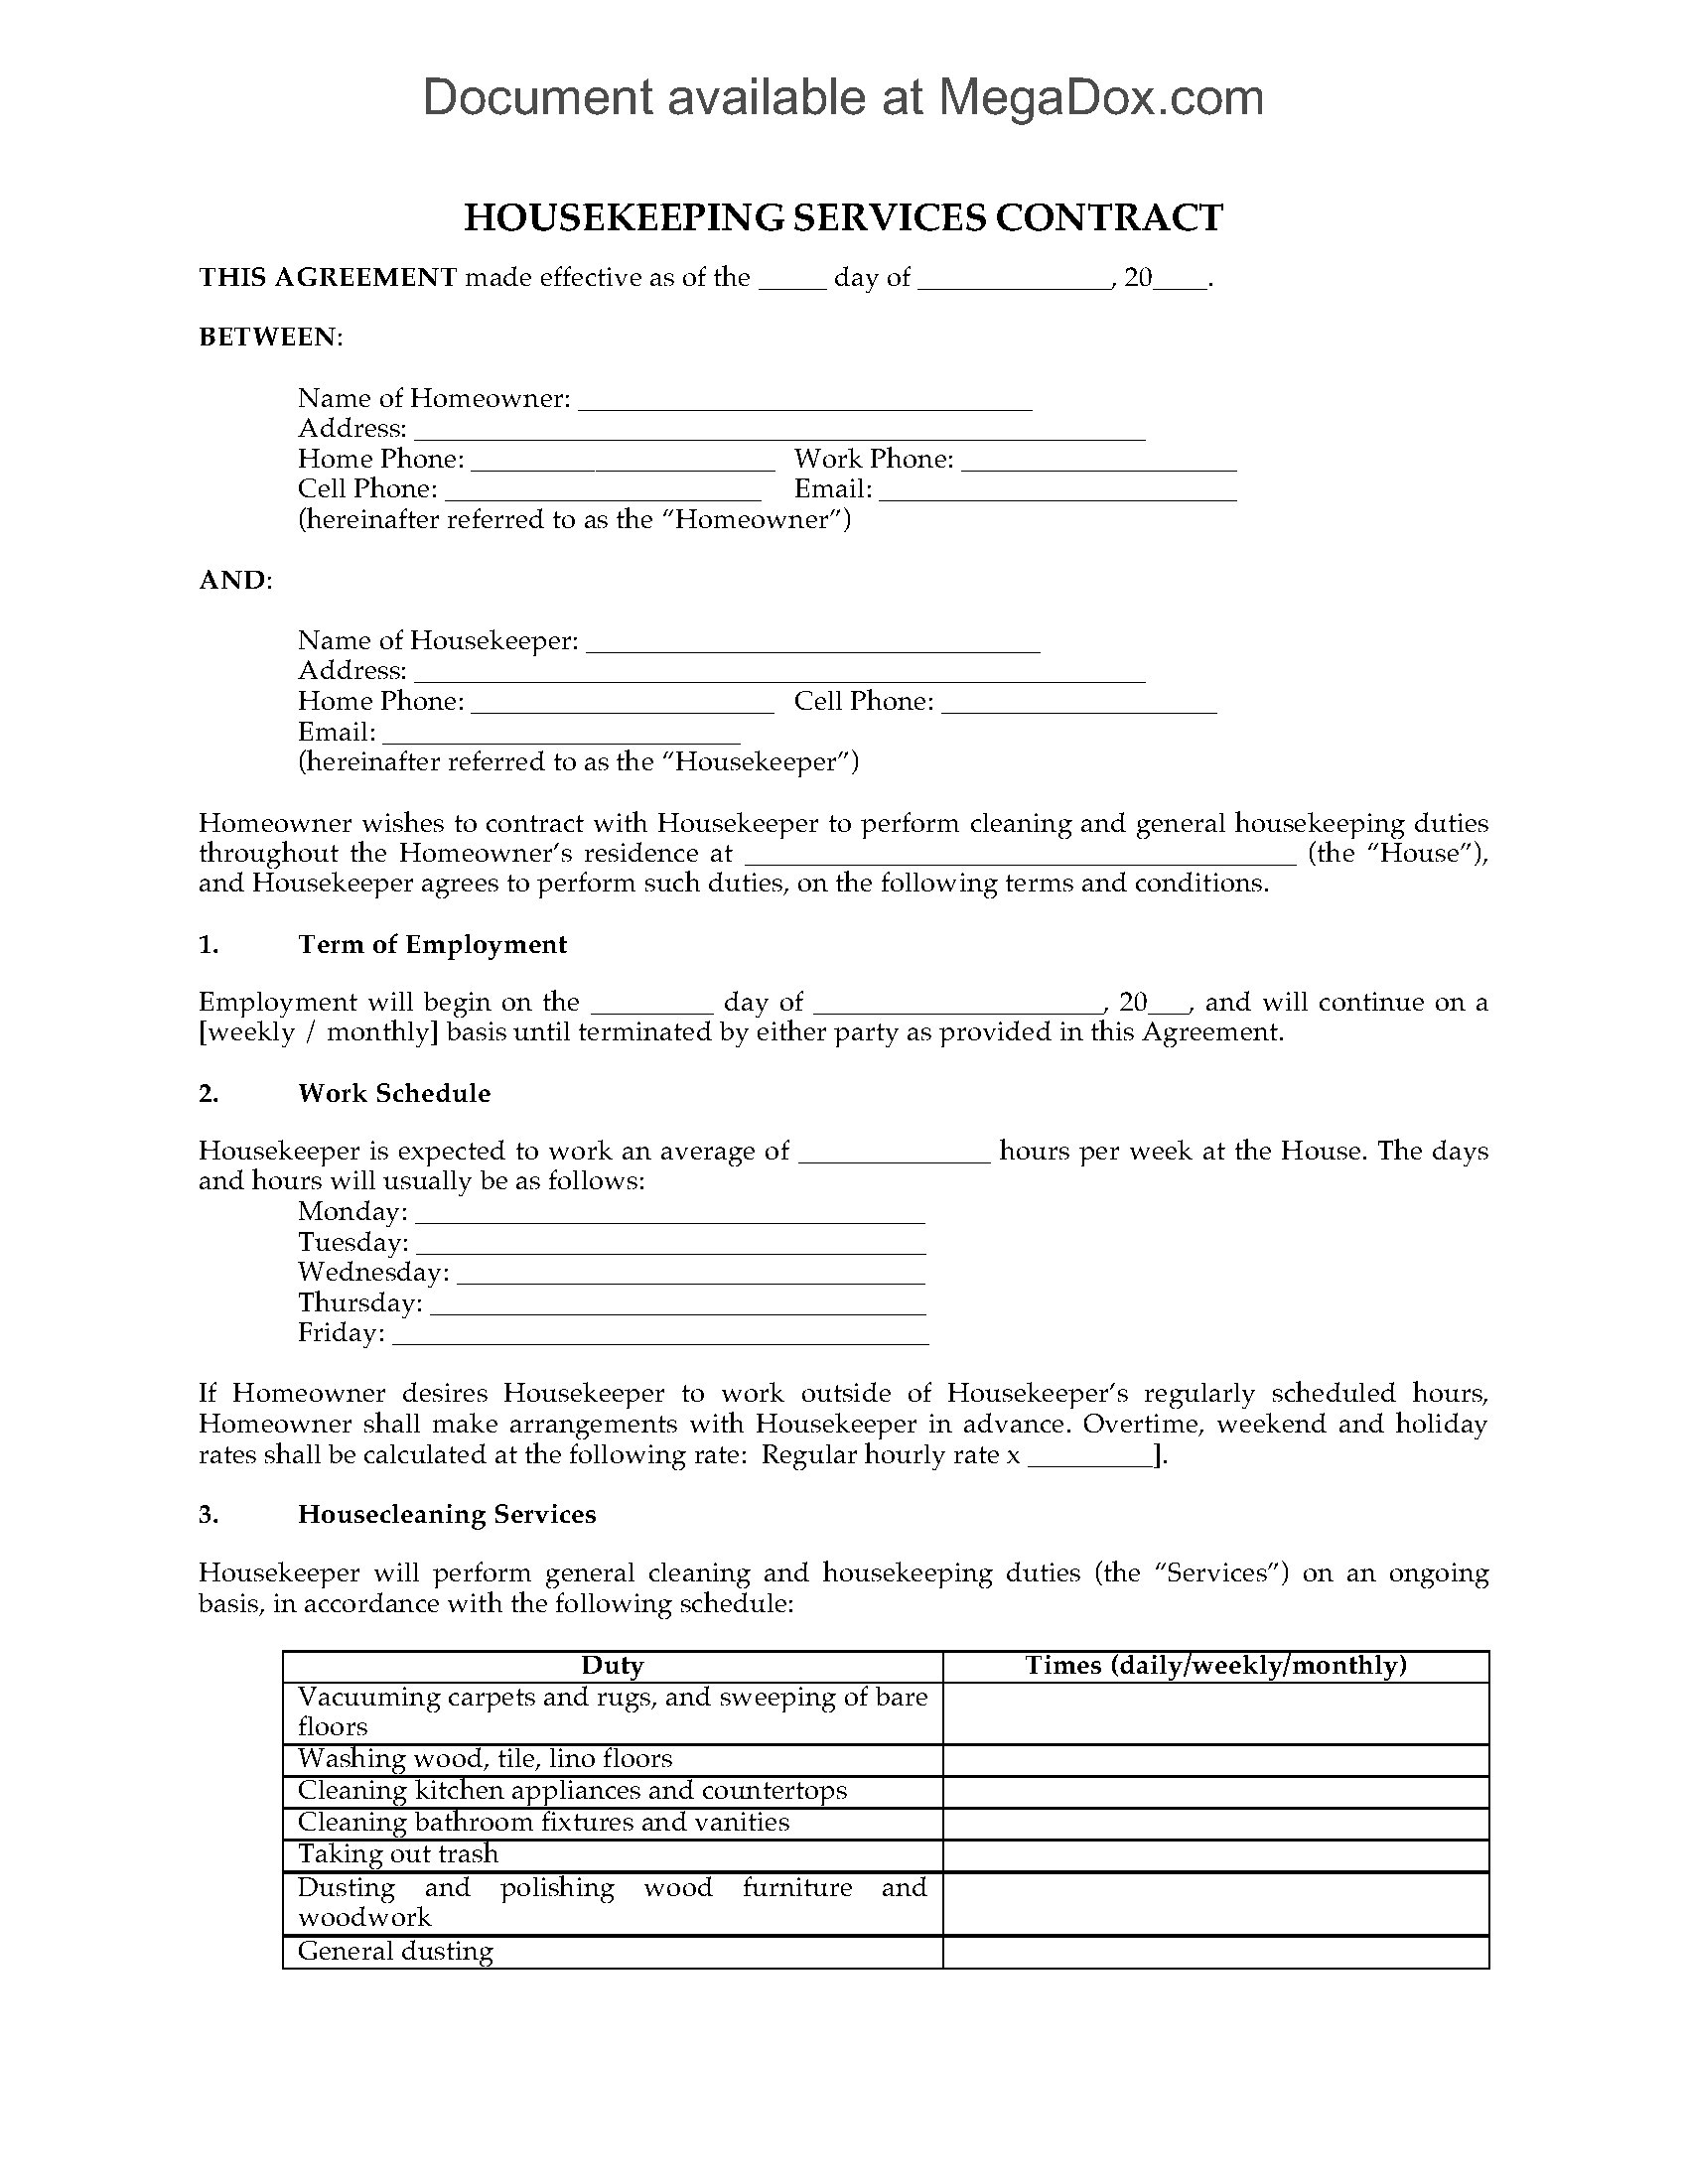 free-housekeeping-contract-template